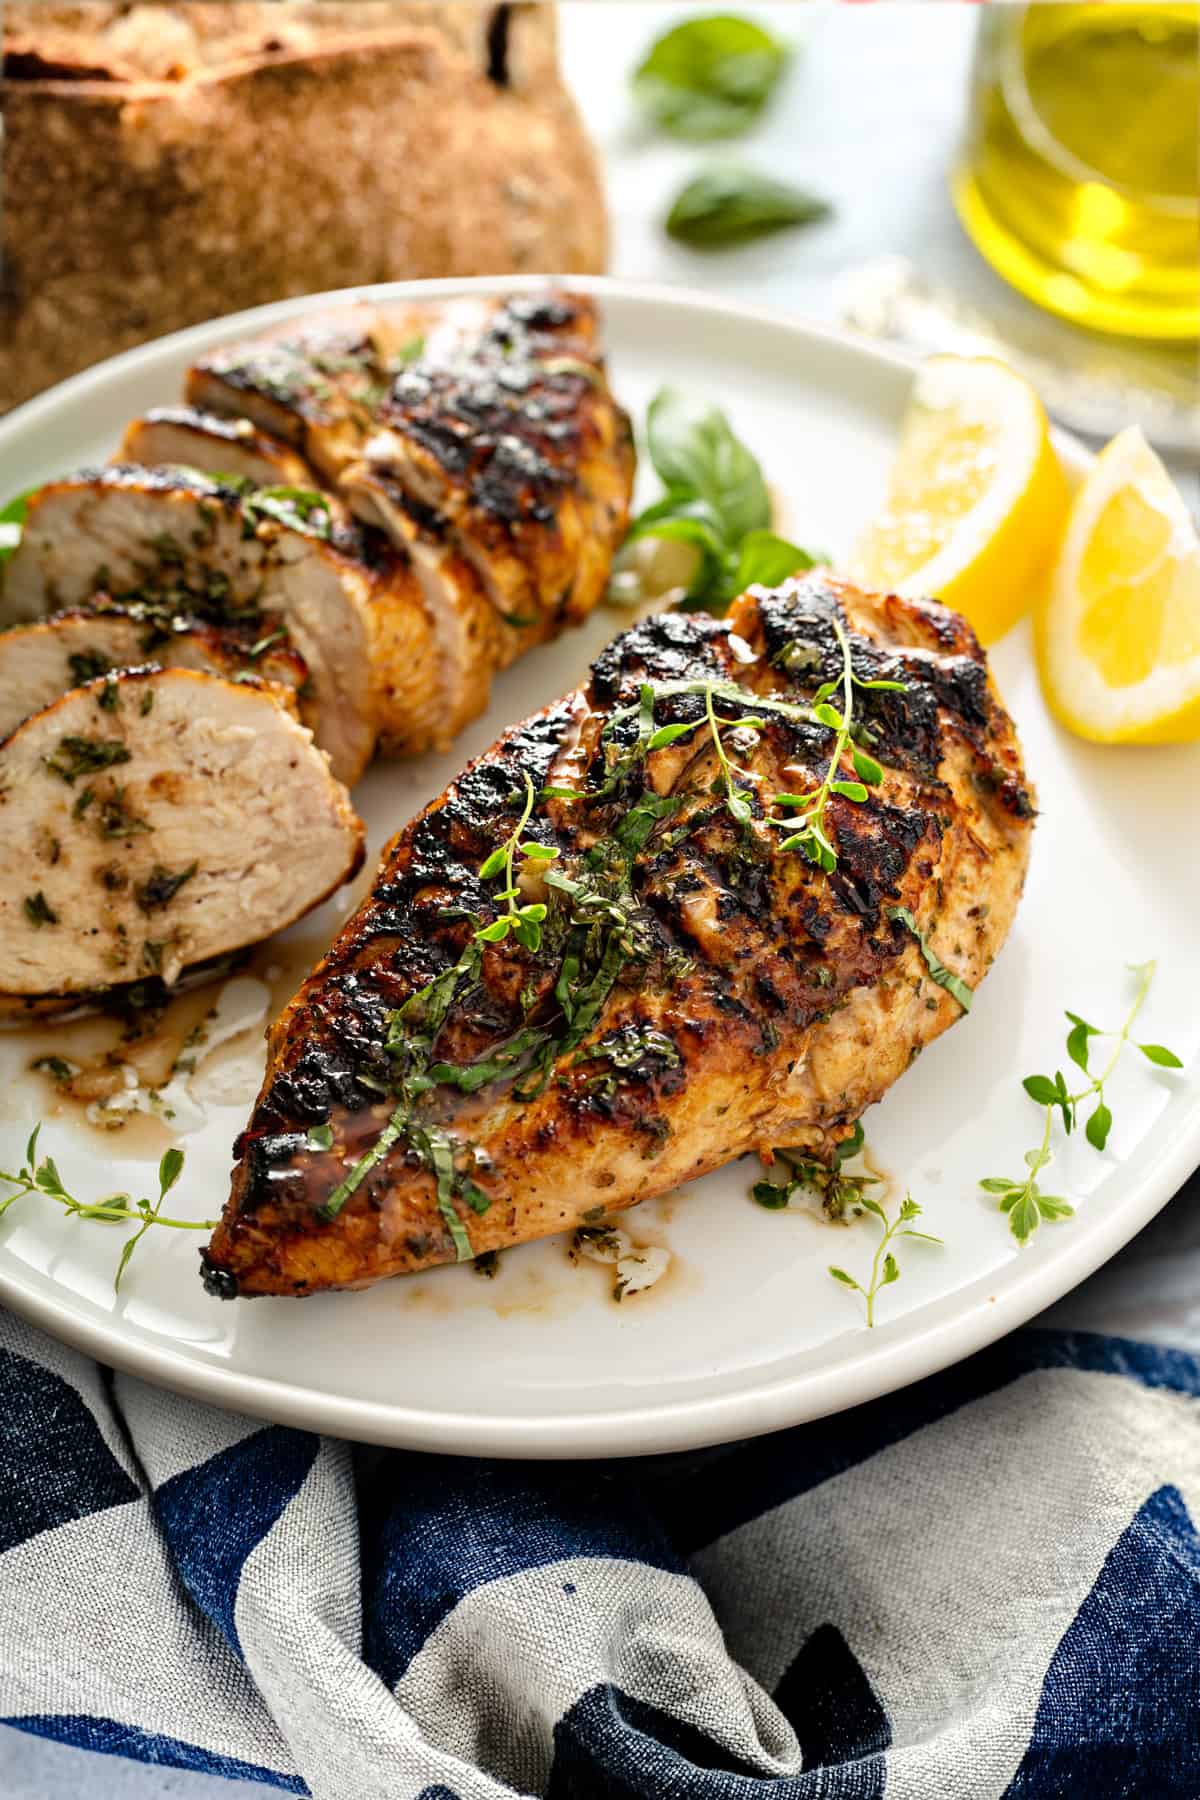 Two chicken breast covered with Greek seasoning on a plate, one of them sliced, two lemon wedges. At the back a loaf of bread and a bottle of olive oil.